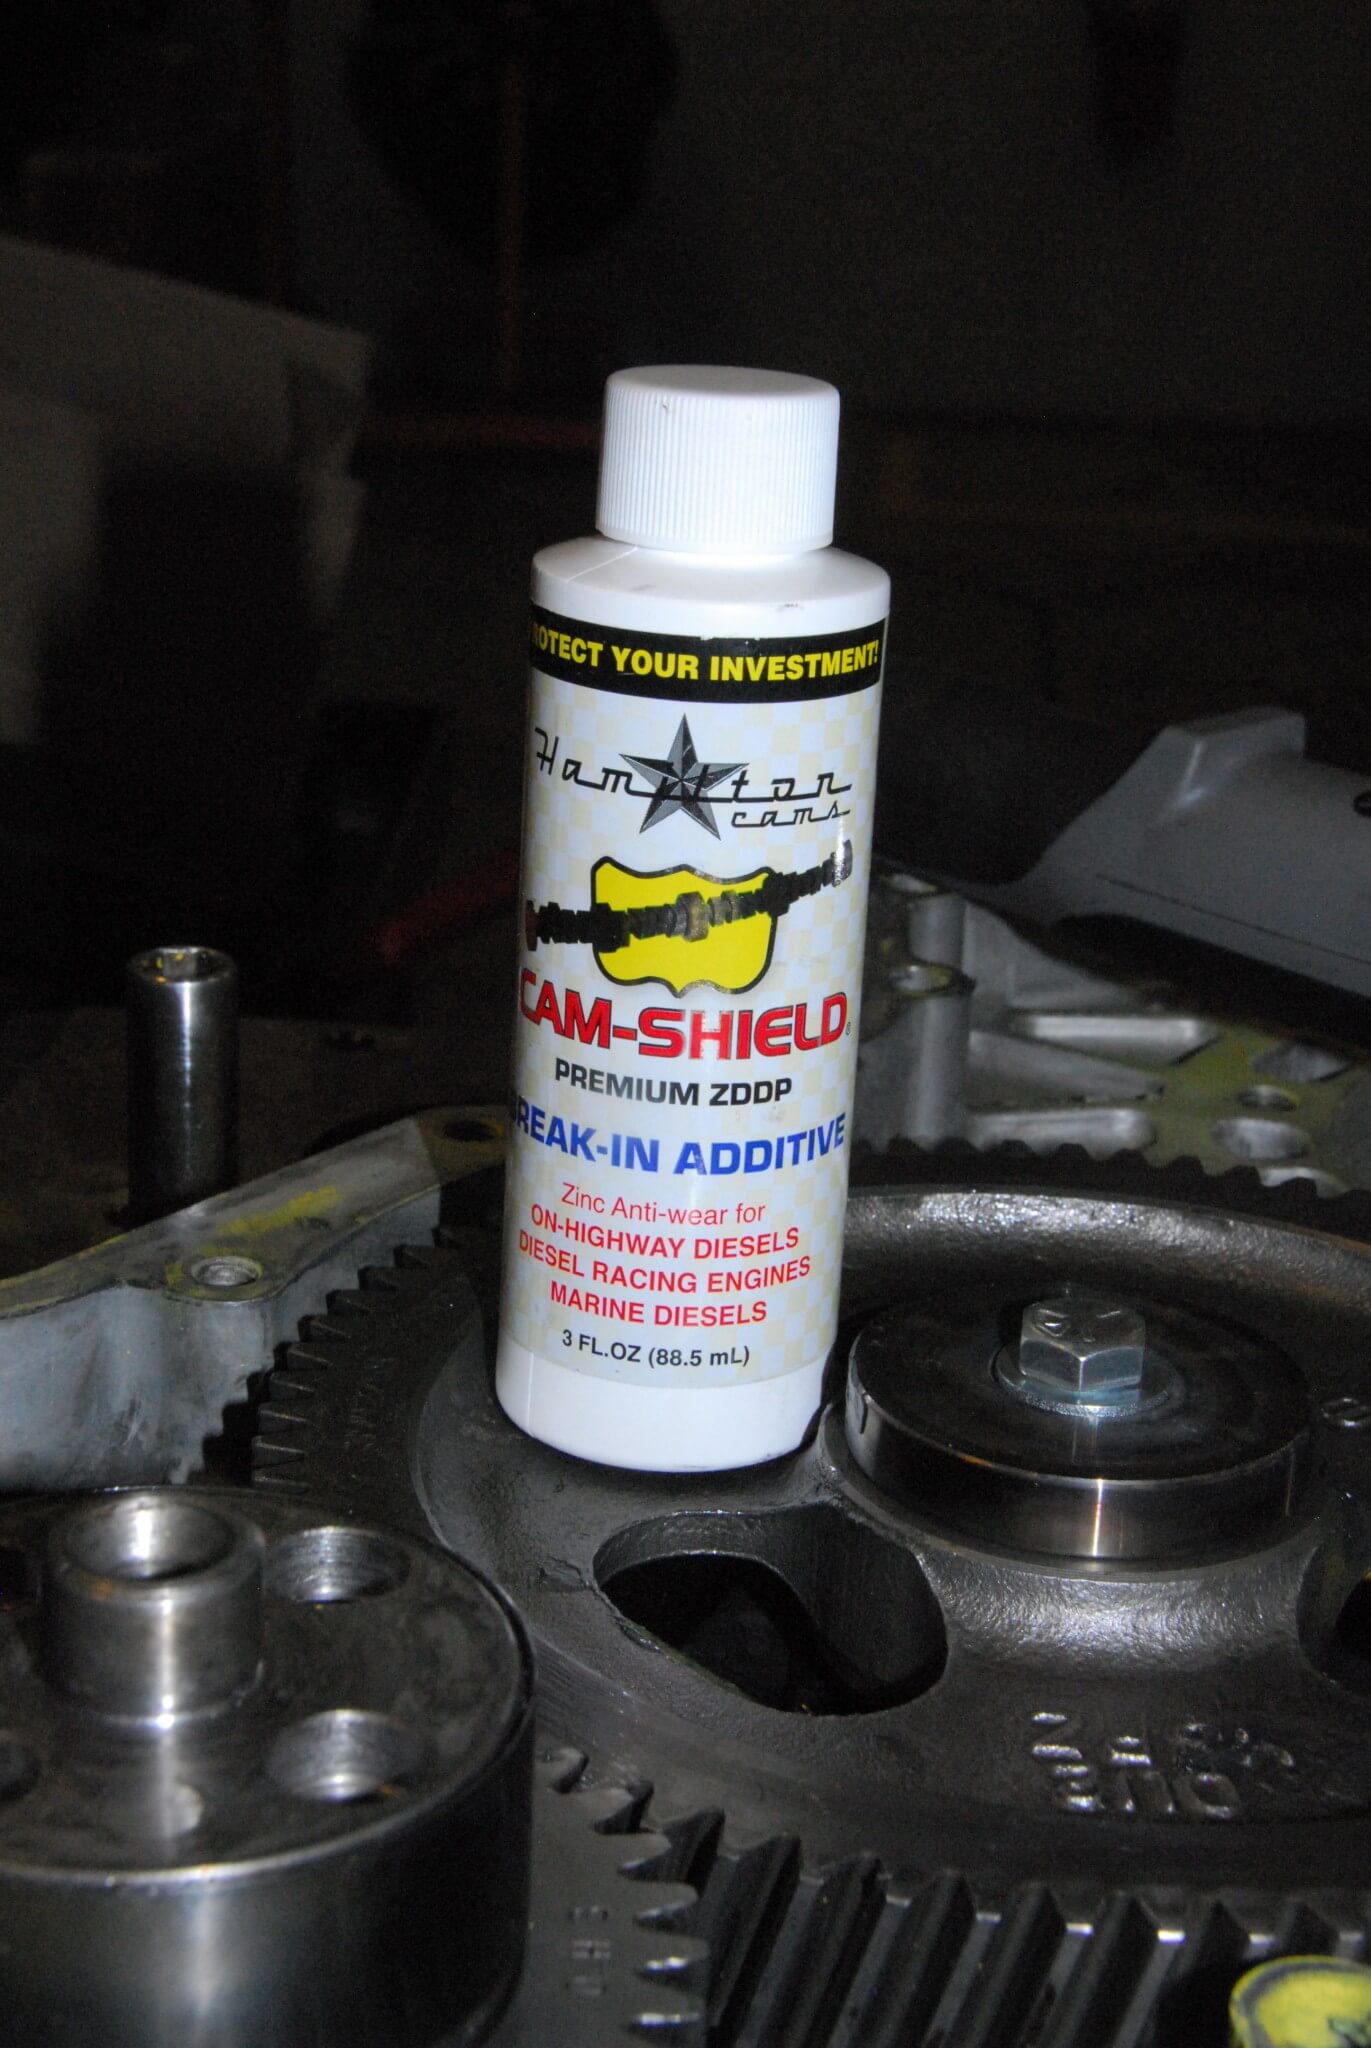 4. Along with assembly lube on the cam lobes and followers, Hamilton requires the use of their high-zinc Cam-Shield break-in lube. This is especially important for a high-performance diesel cam as standard engine oil may not provide a proper break-in.